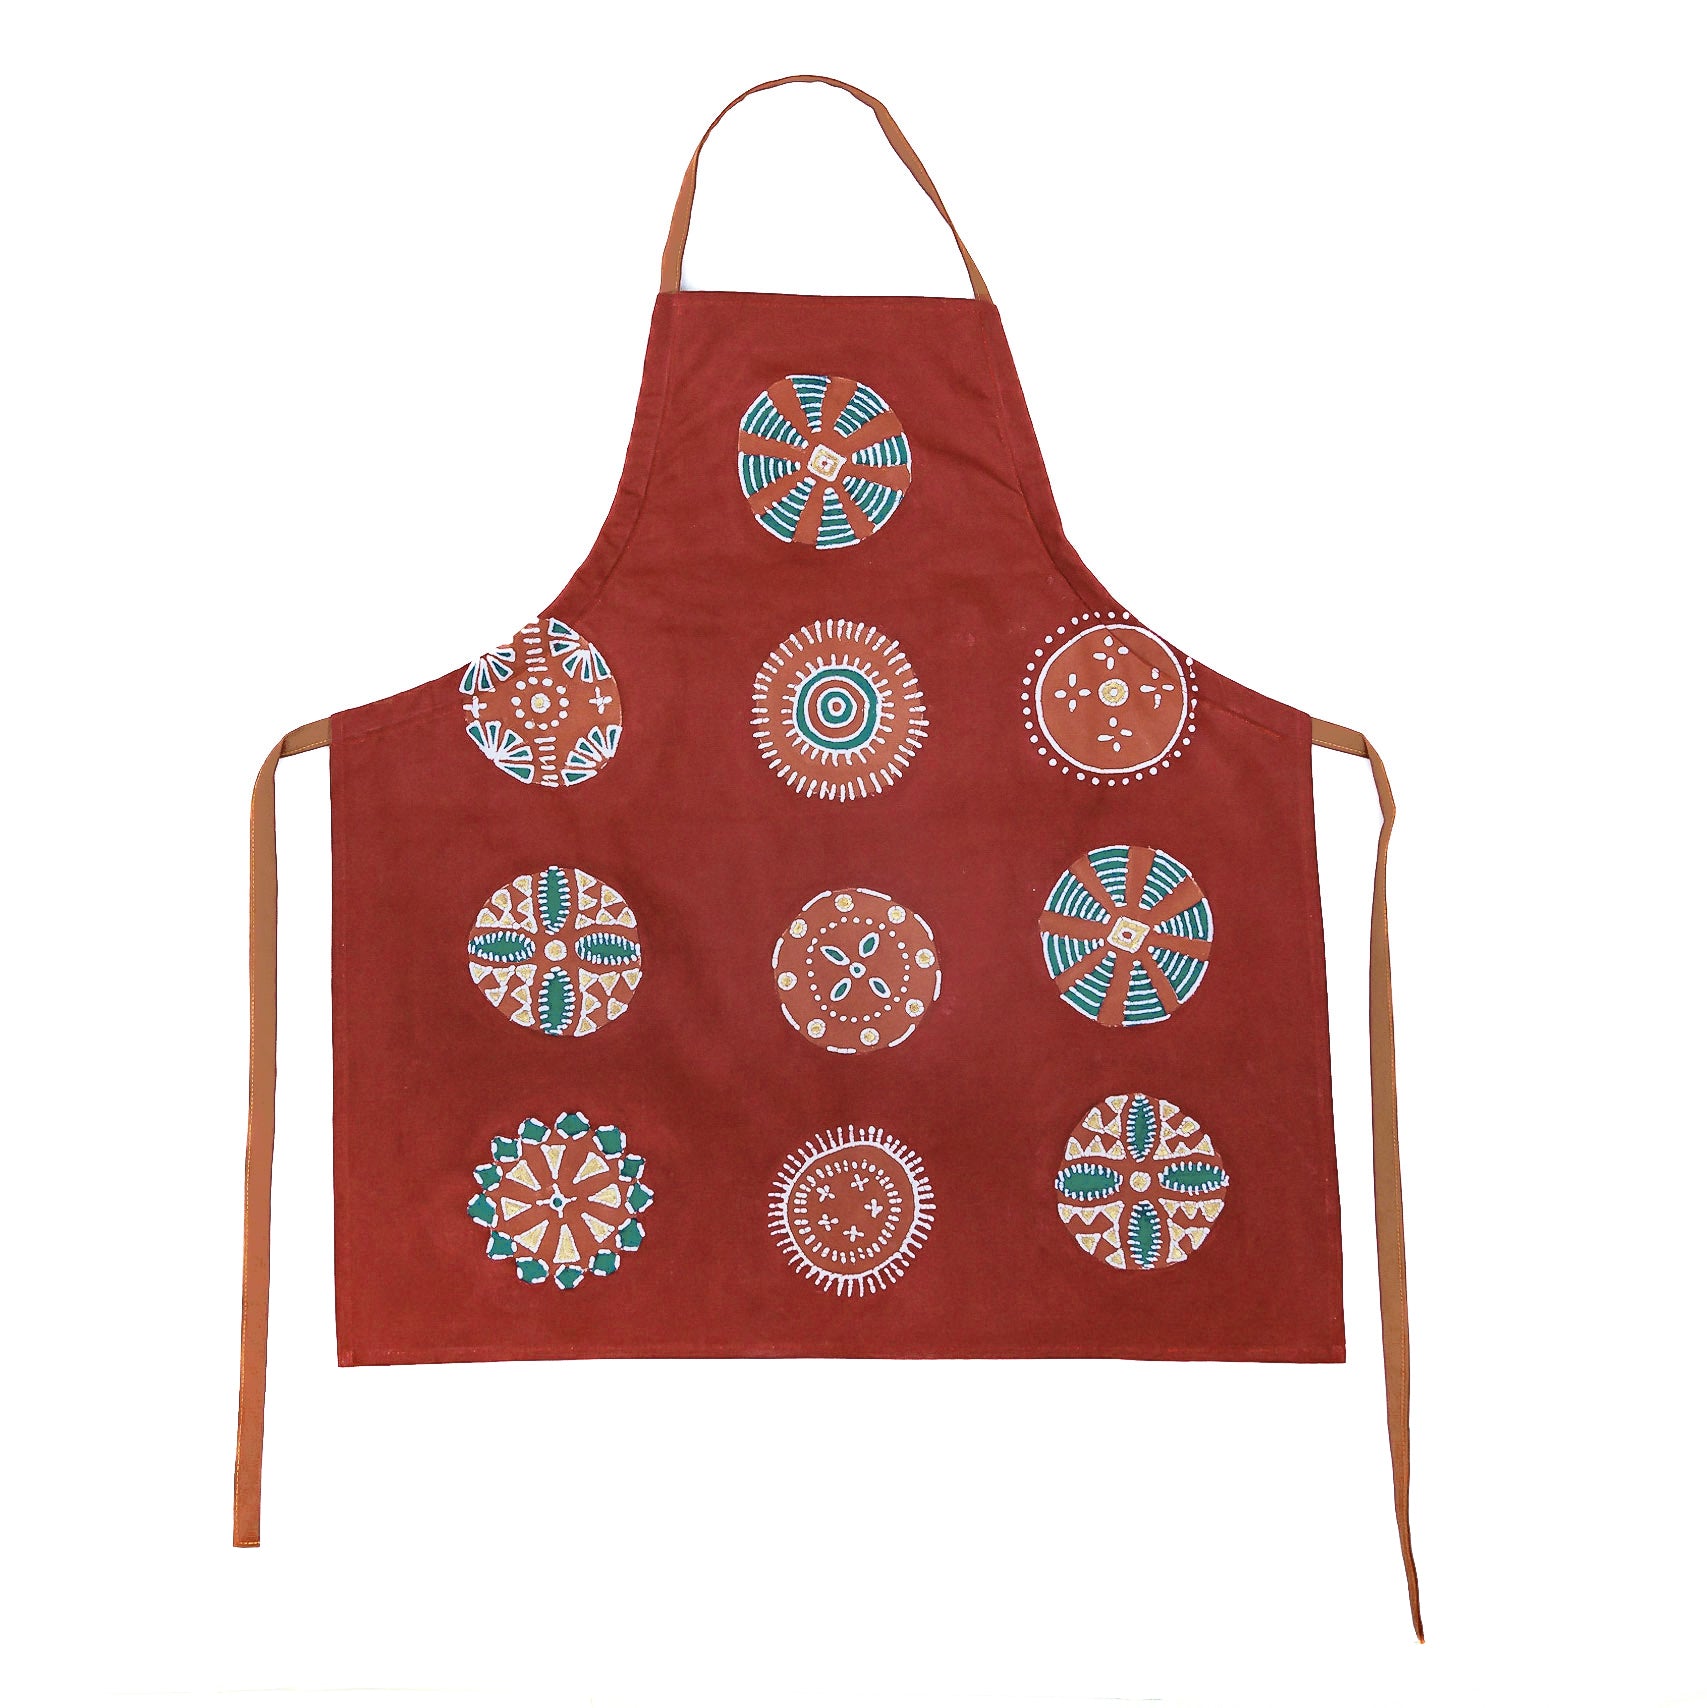 Kuosi Festive Aprons - Hand Painted by TRIBAL TEXTILES - Handcrafted Home Decor Interiors - African Made